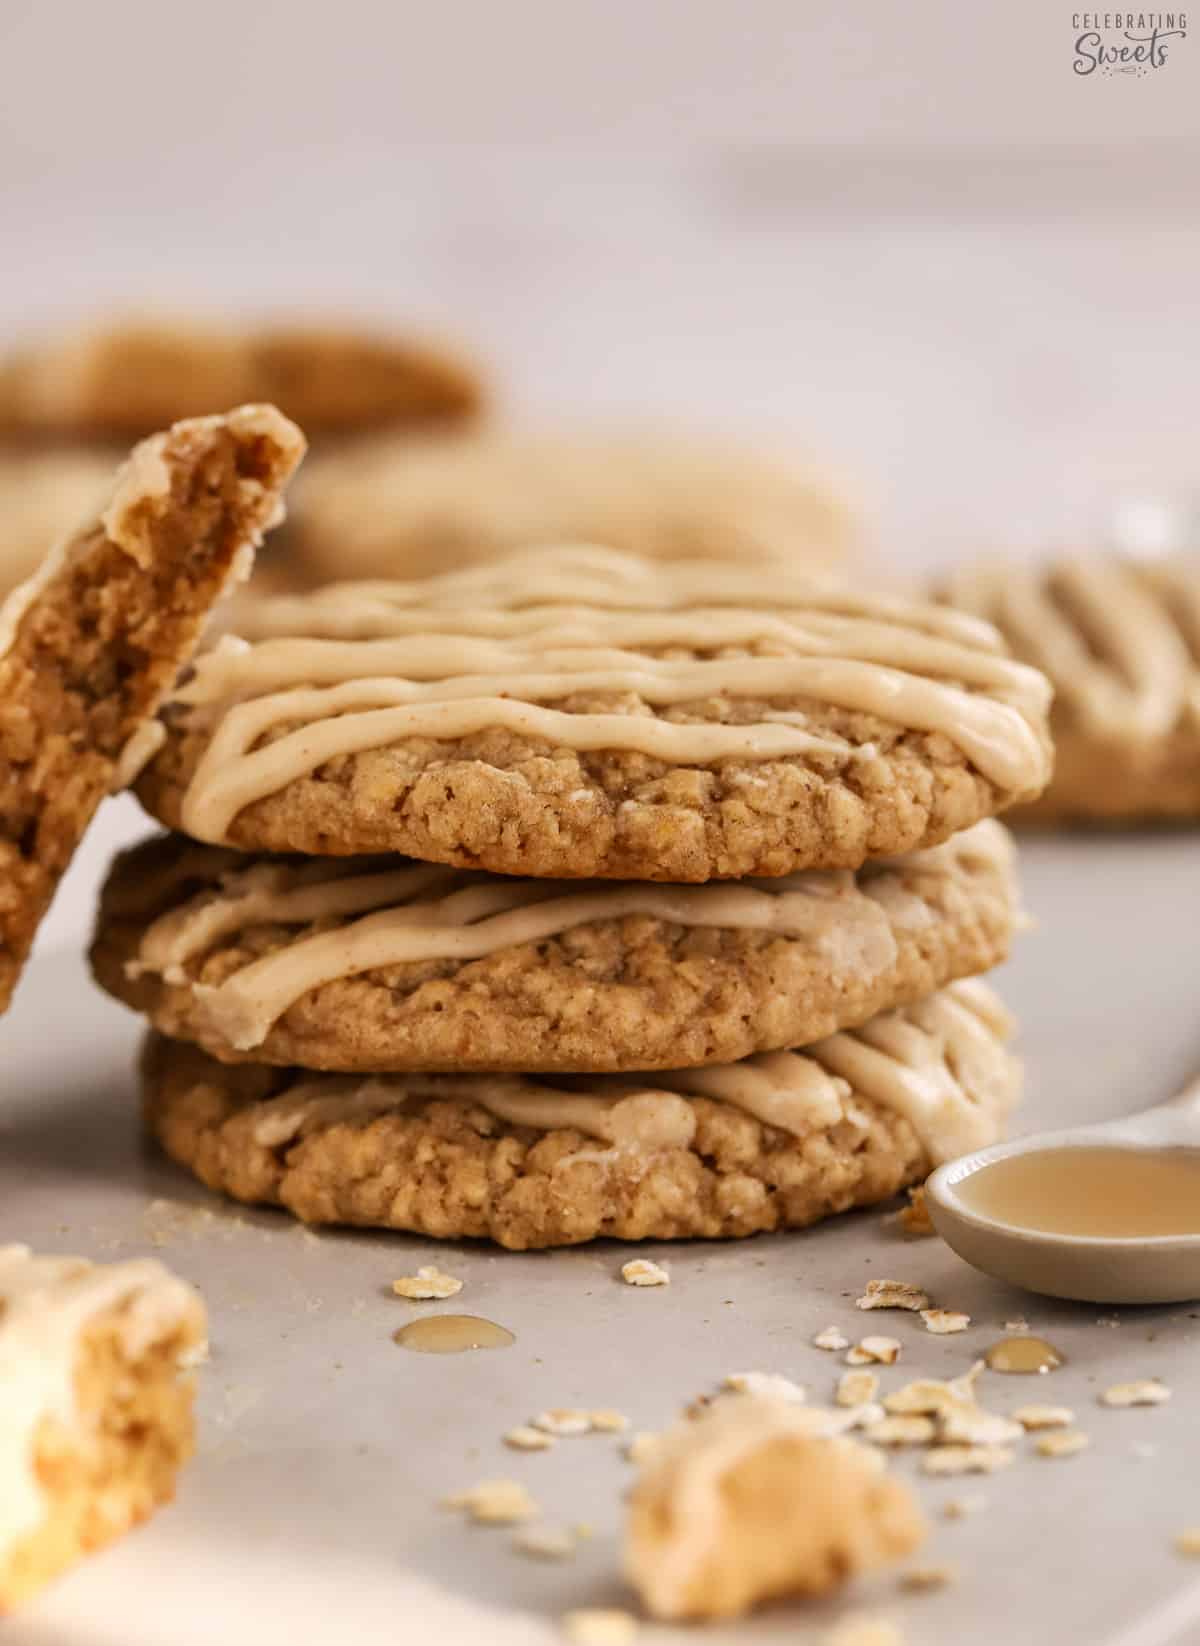 Stack of maple oatmeal cookies surrounded by oats and a spoon filled with syrup.